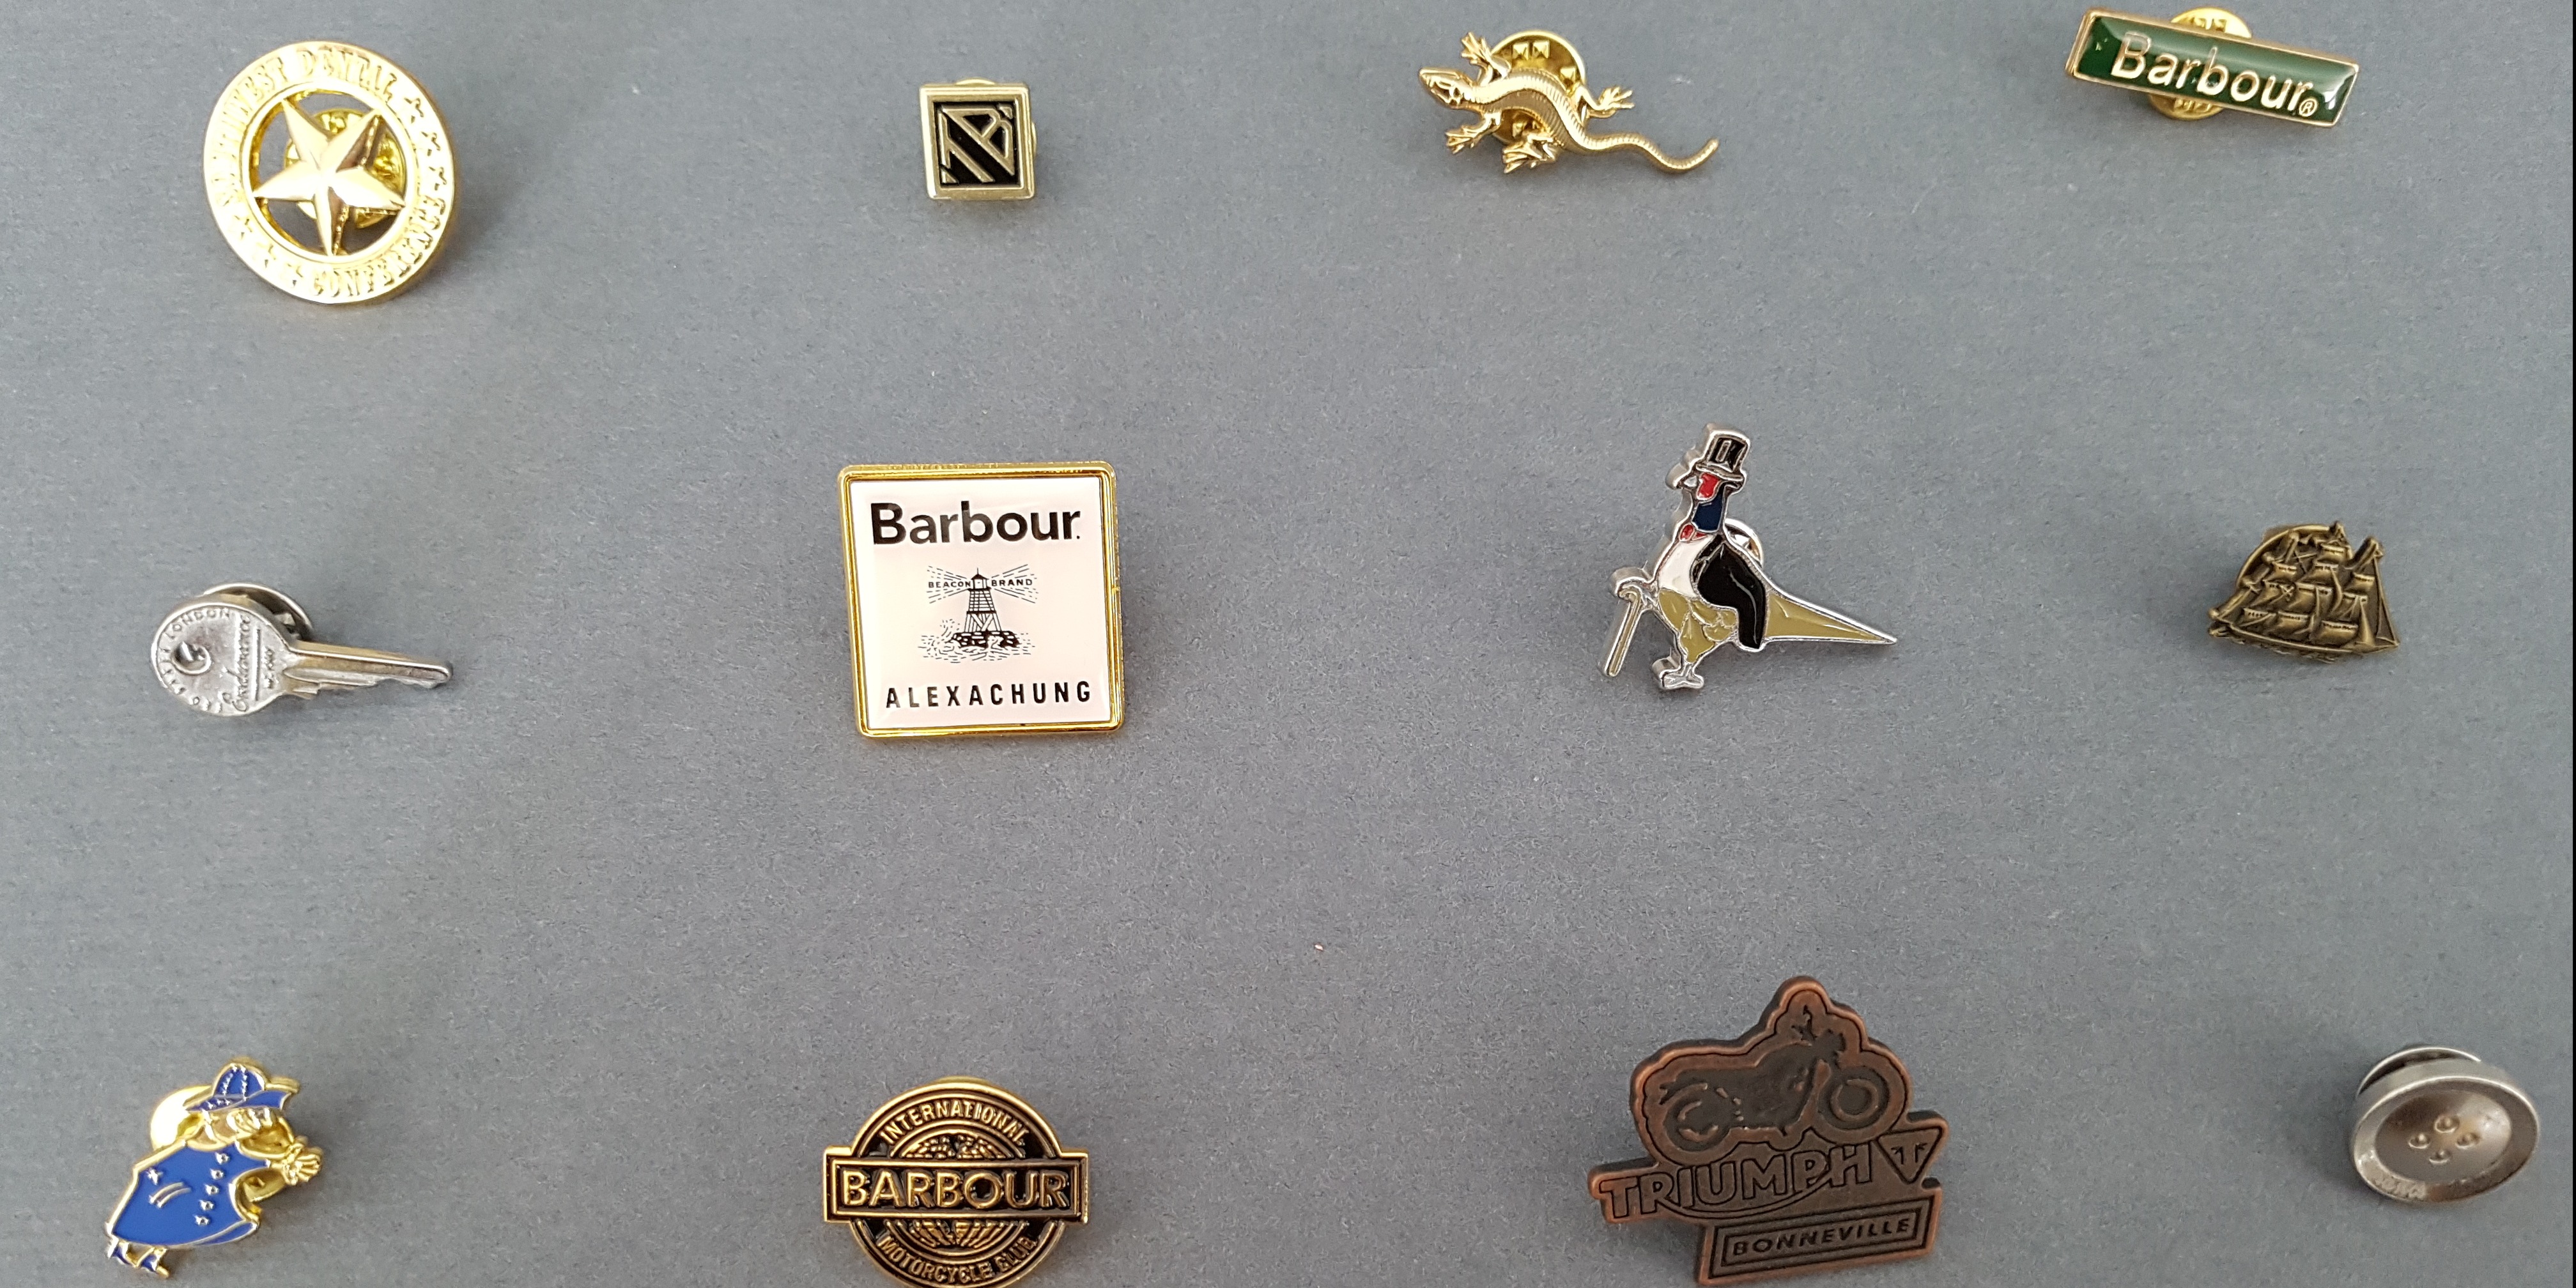 What types of pin can I have on the back of enamel badges?